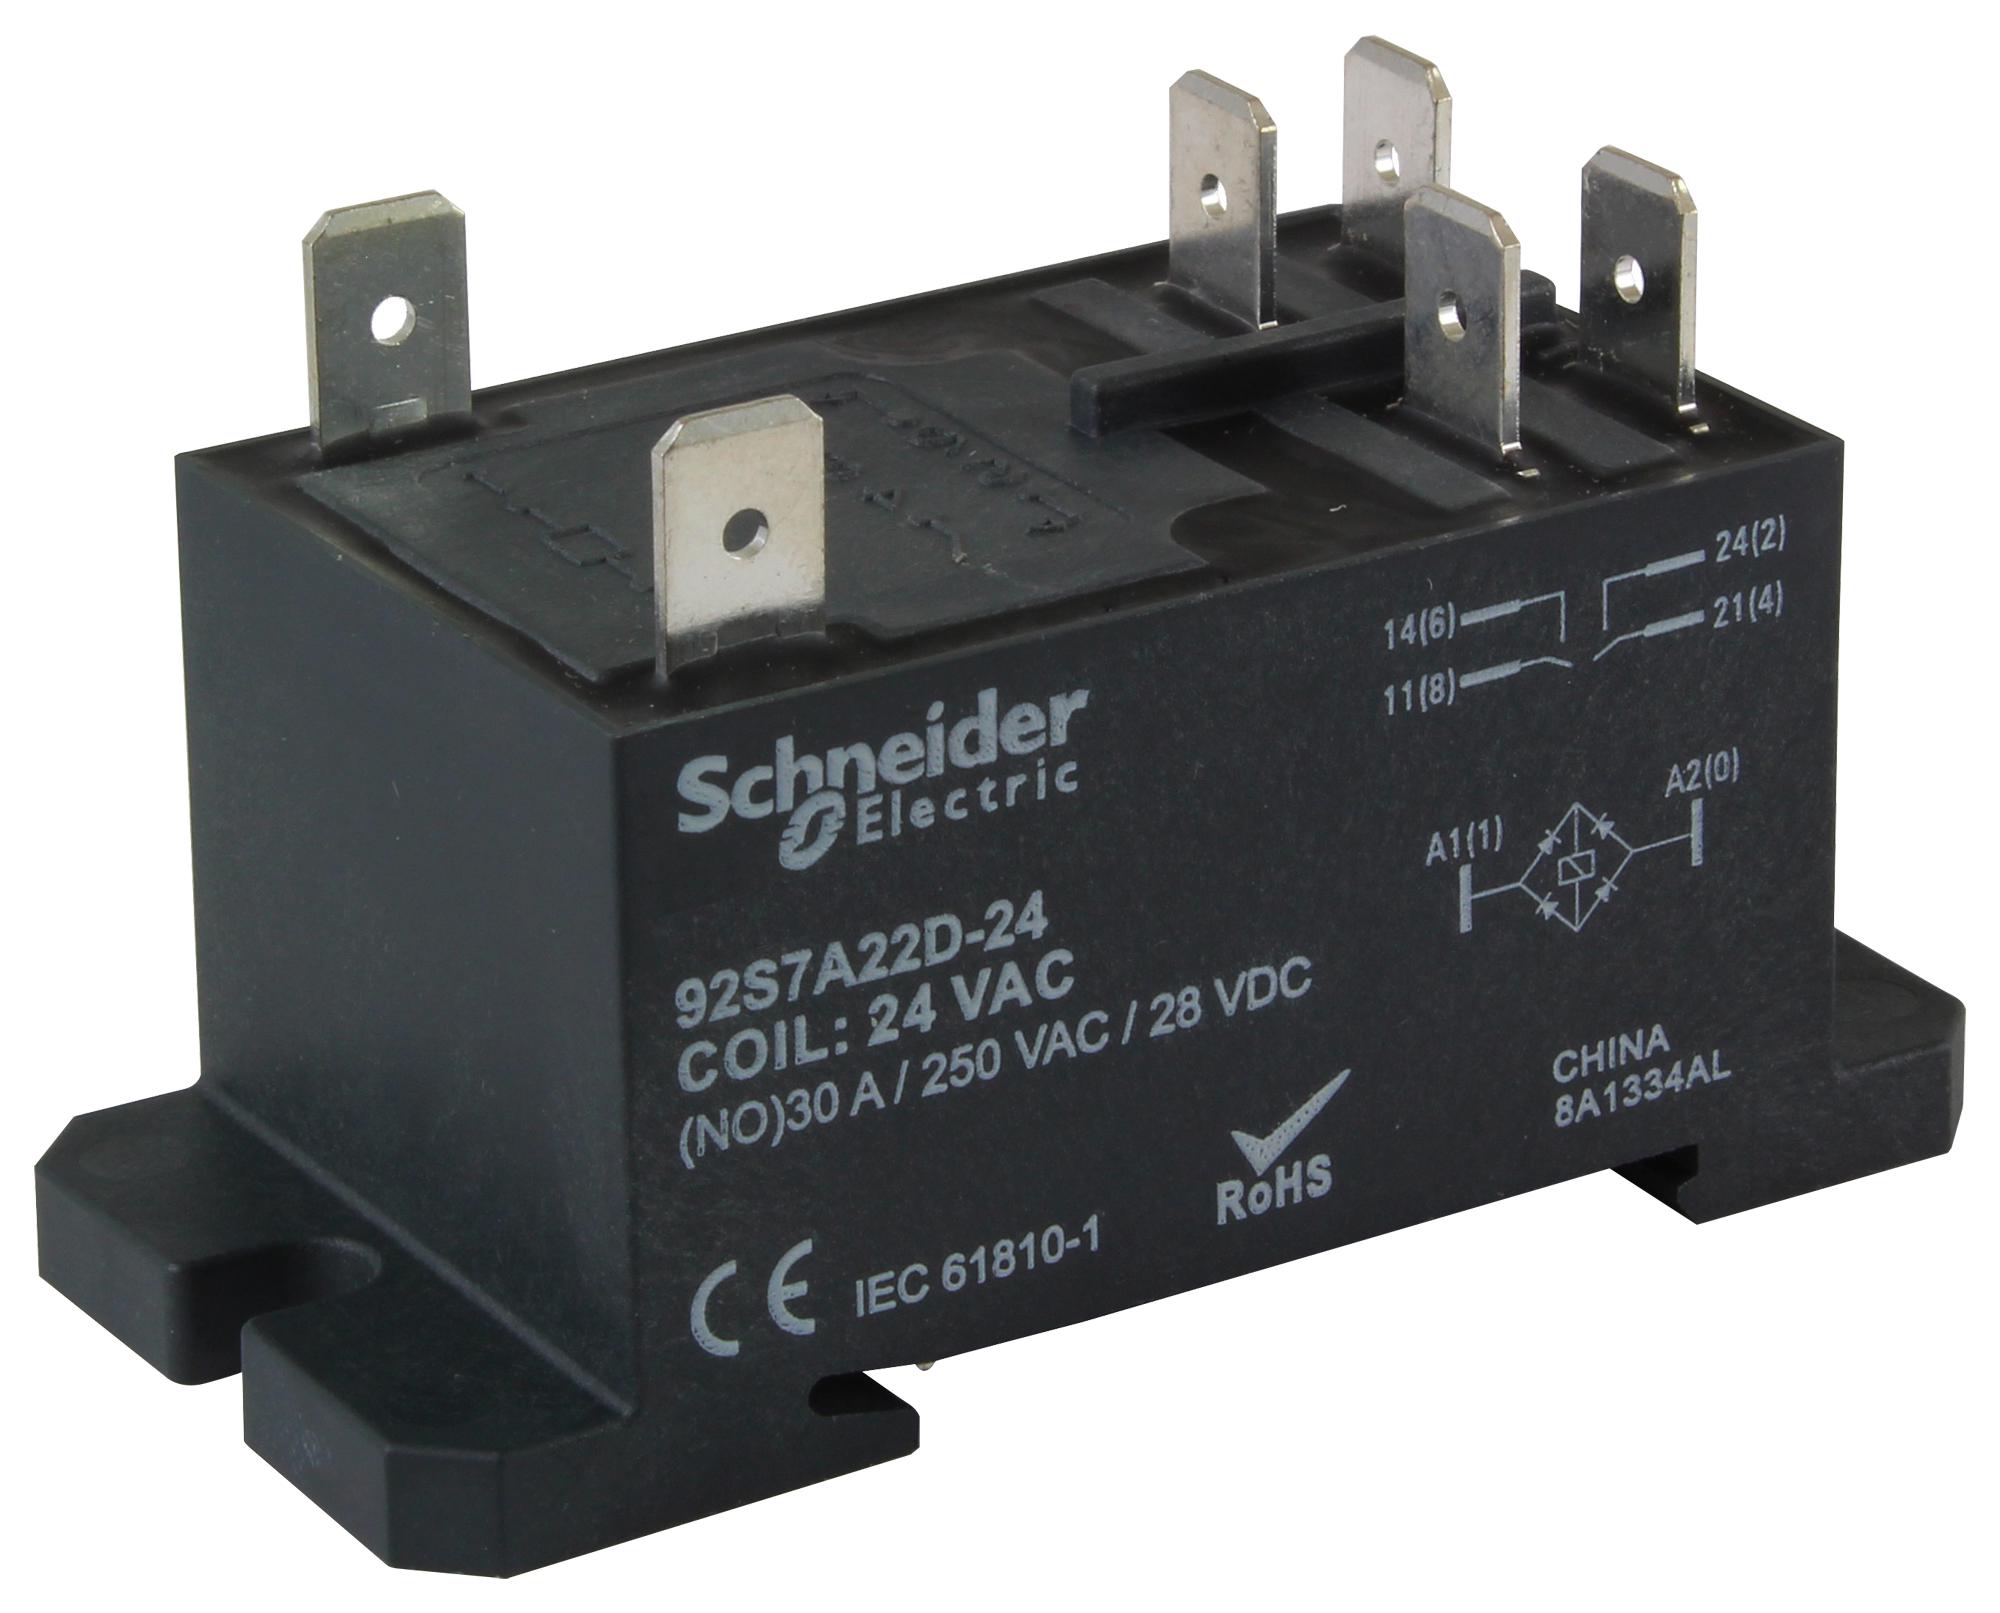 img 92S11A22D24_SCHNEIDER-ELECTRIC-LEGACY-RELAY.jpg